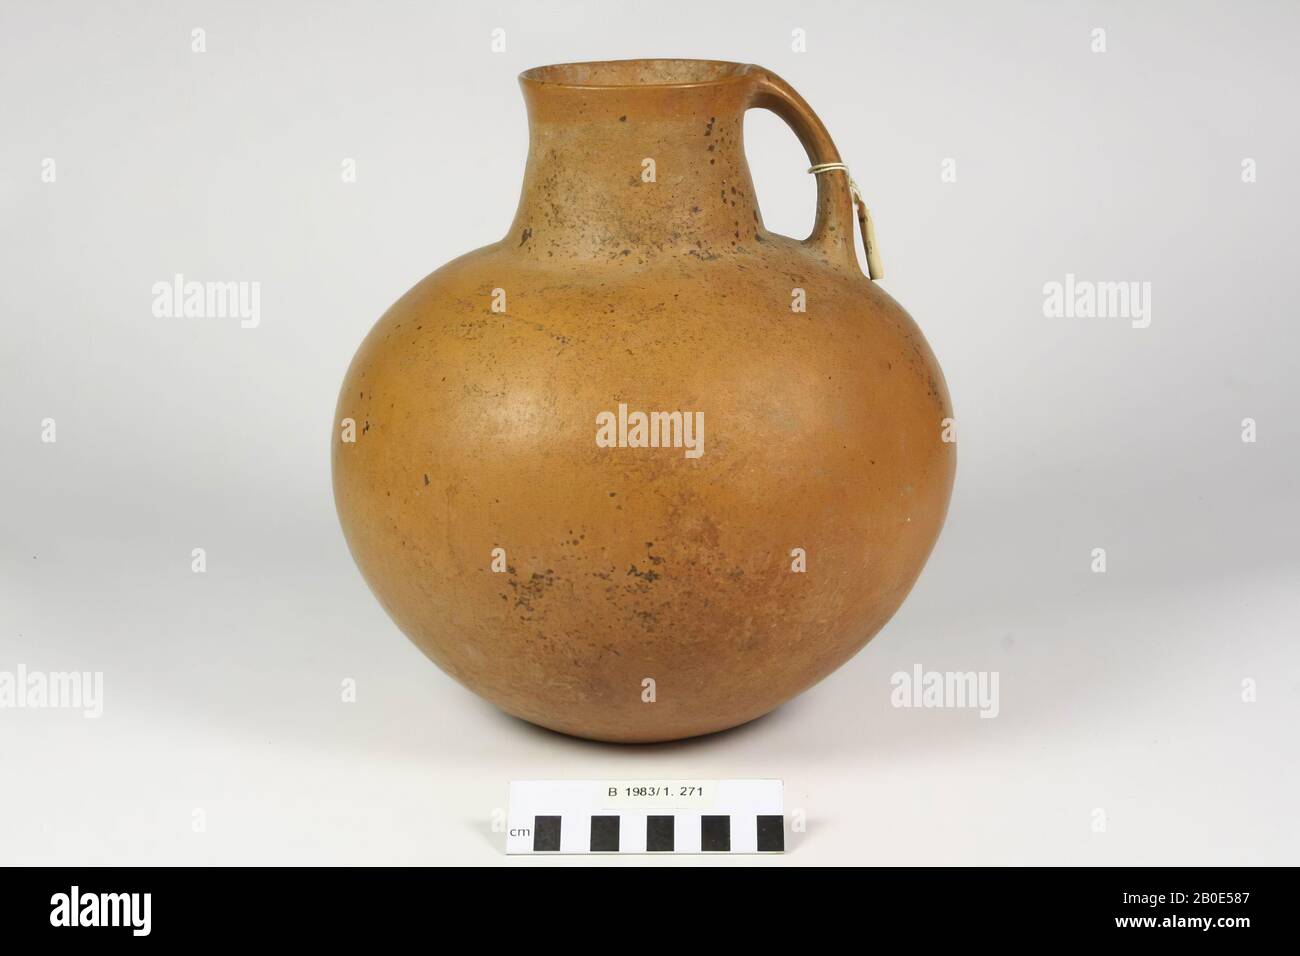 An earthenware jug with a rounded body and a vertically long handle. Polished., Crockery, earthenware, H 27.3 cm, D 25.7 cm, D edge 10 cm, Iran Stock Photo